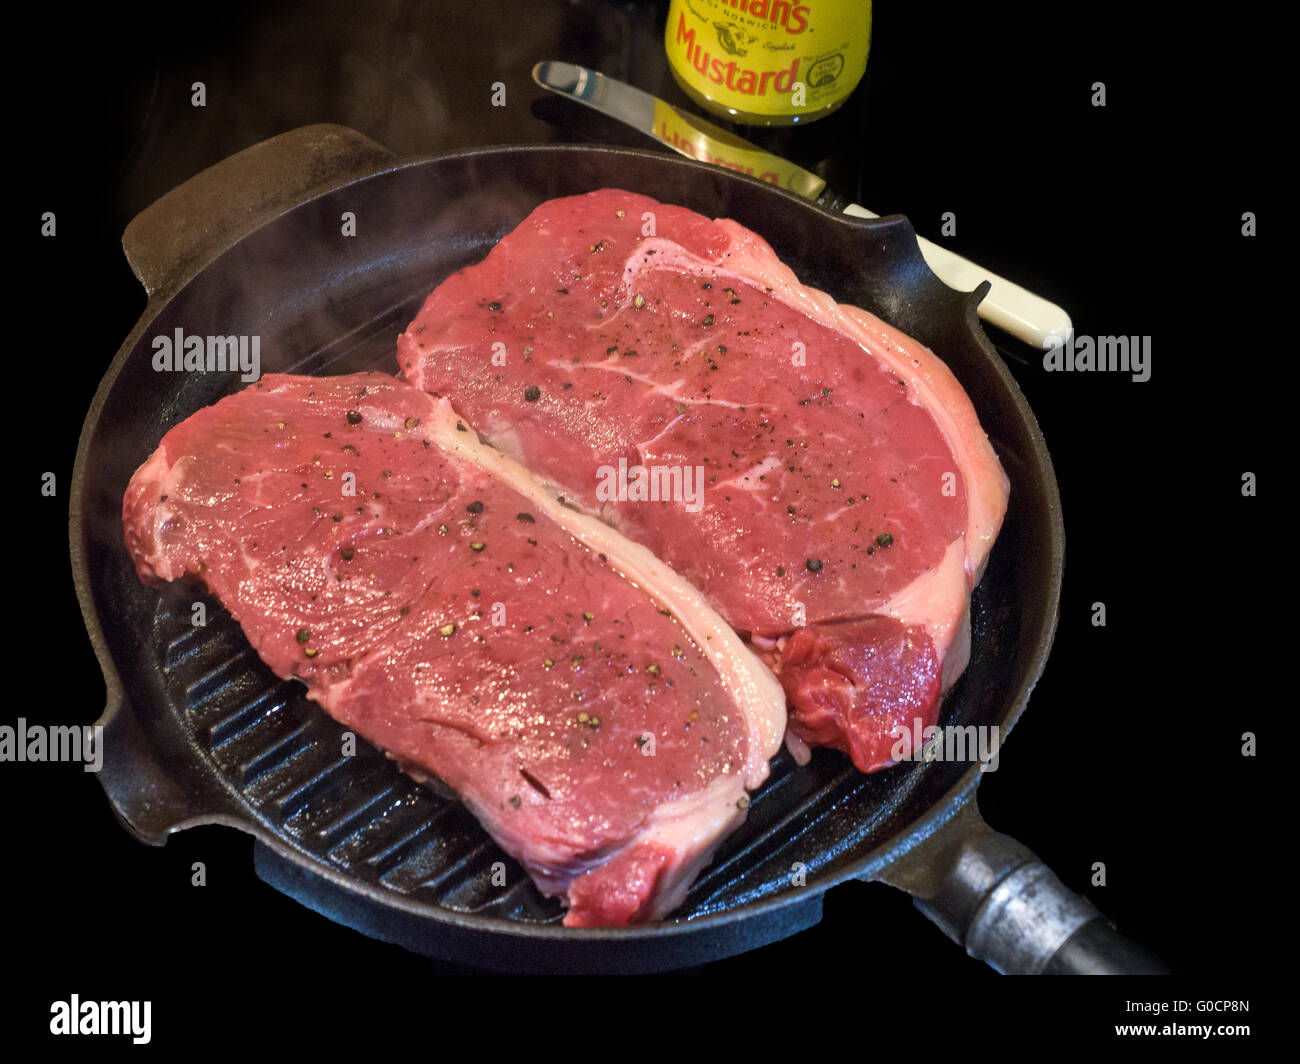 Sirloin steak to make your mouth water Stock Photo